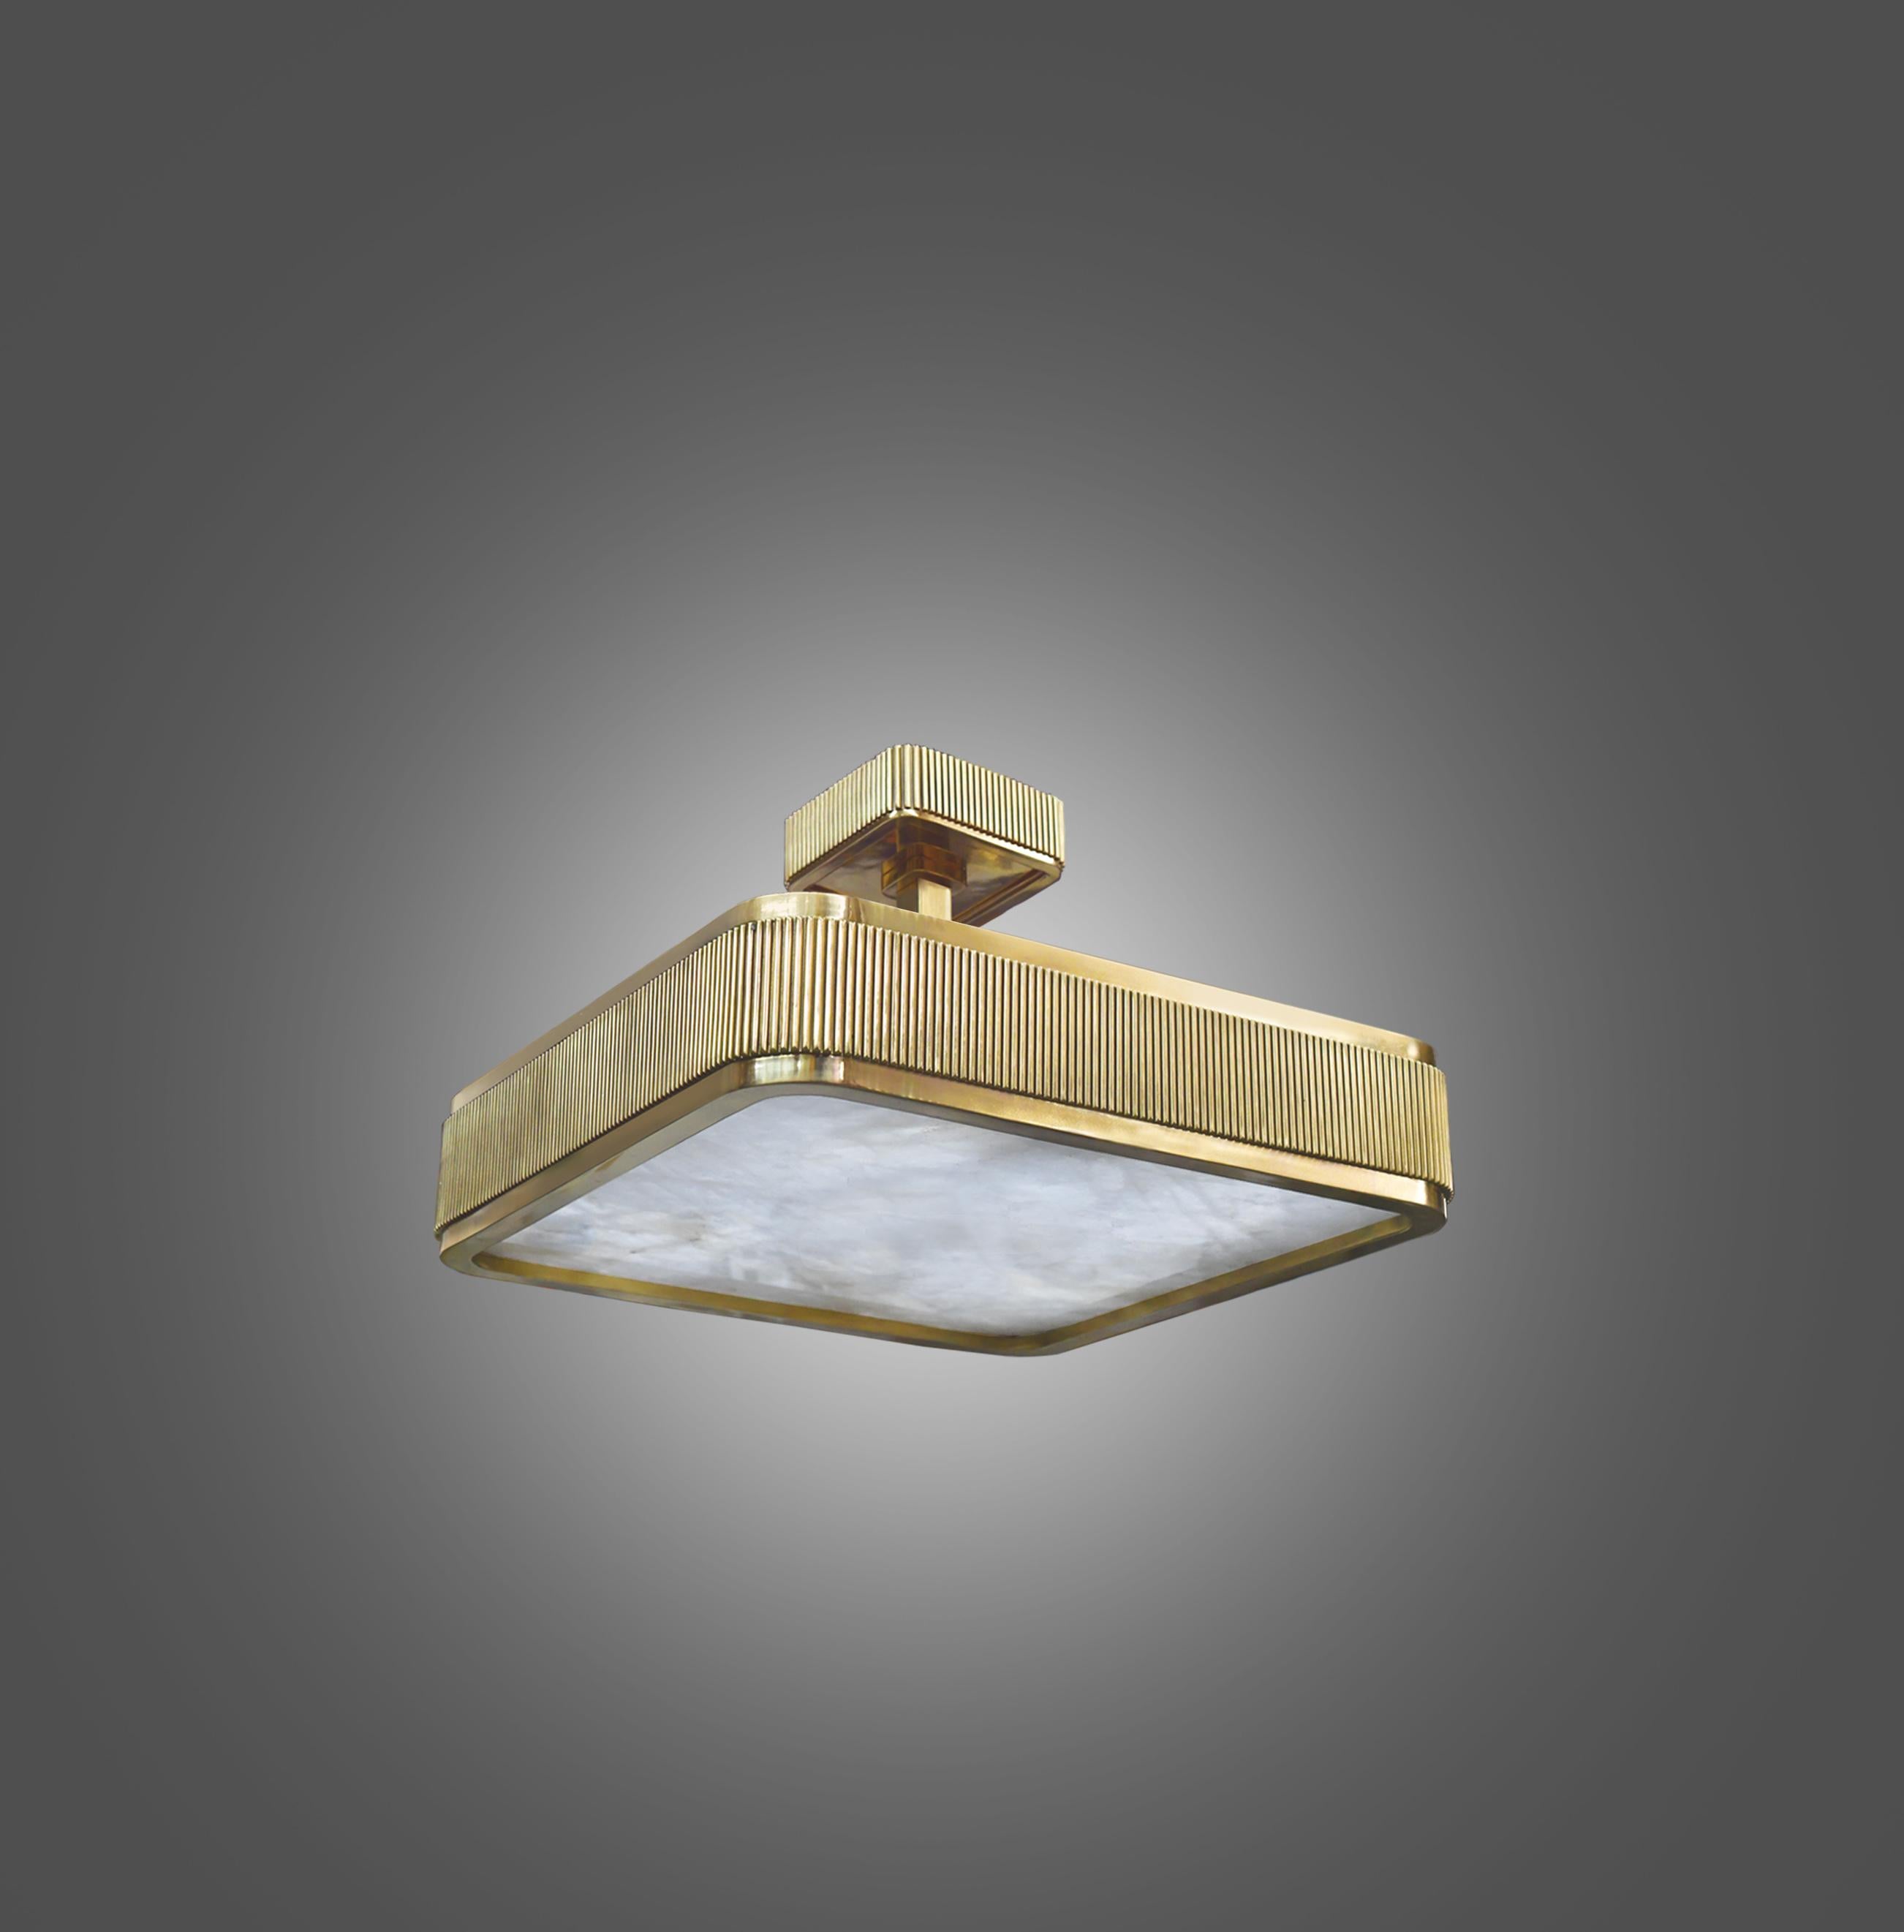 Group of two elegant form fixture with polished brass frame and rock crystal panel, BSO rock crystal semi flush mount created by Phoenix, NYC.

Height can be adjustable.

Lutron dimmer system. 
Each fixture installs four E26 base sockets. 
Use four